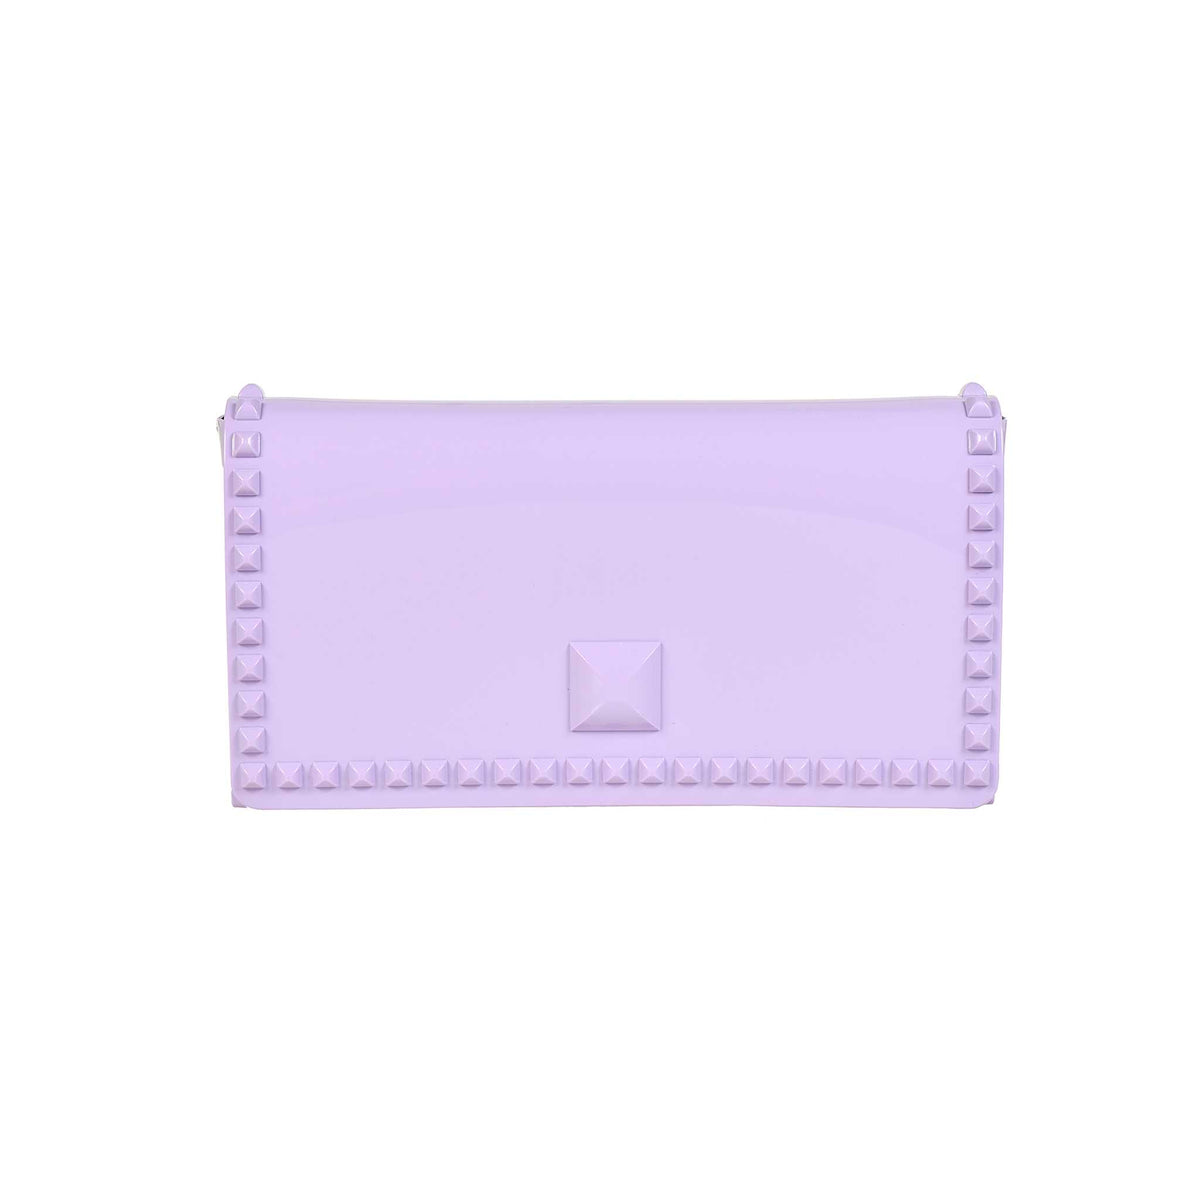 Nora flap rubber purse from Carmen Sol